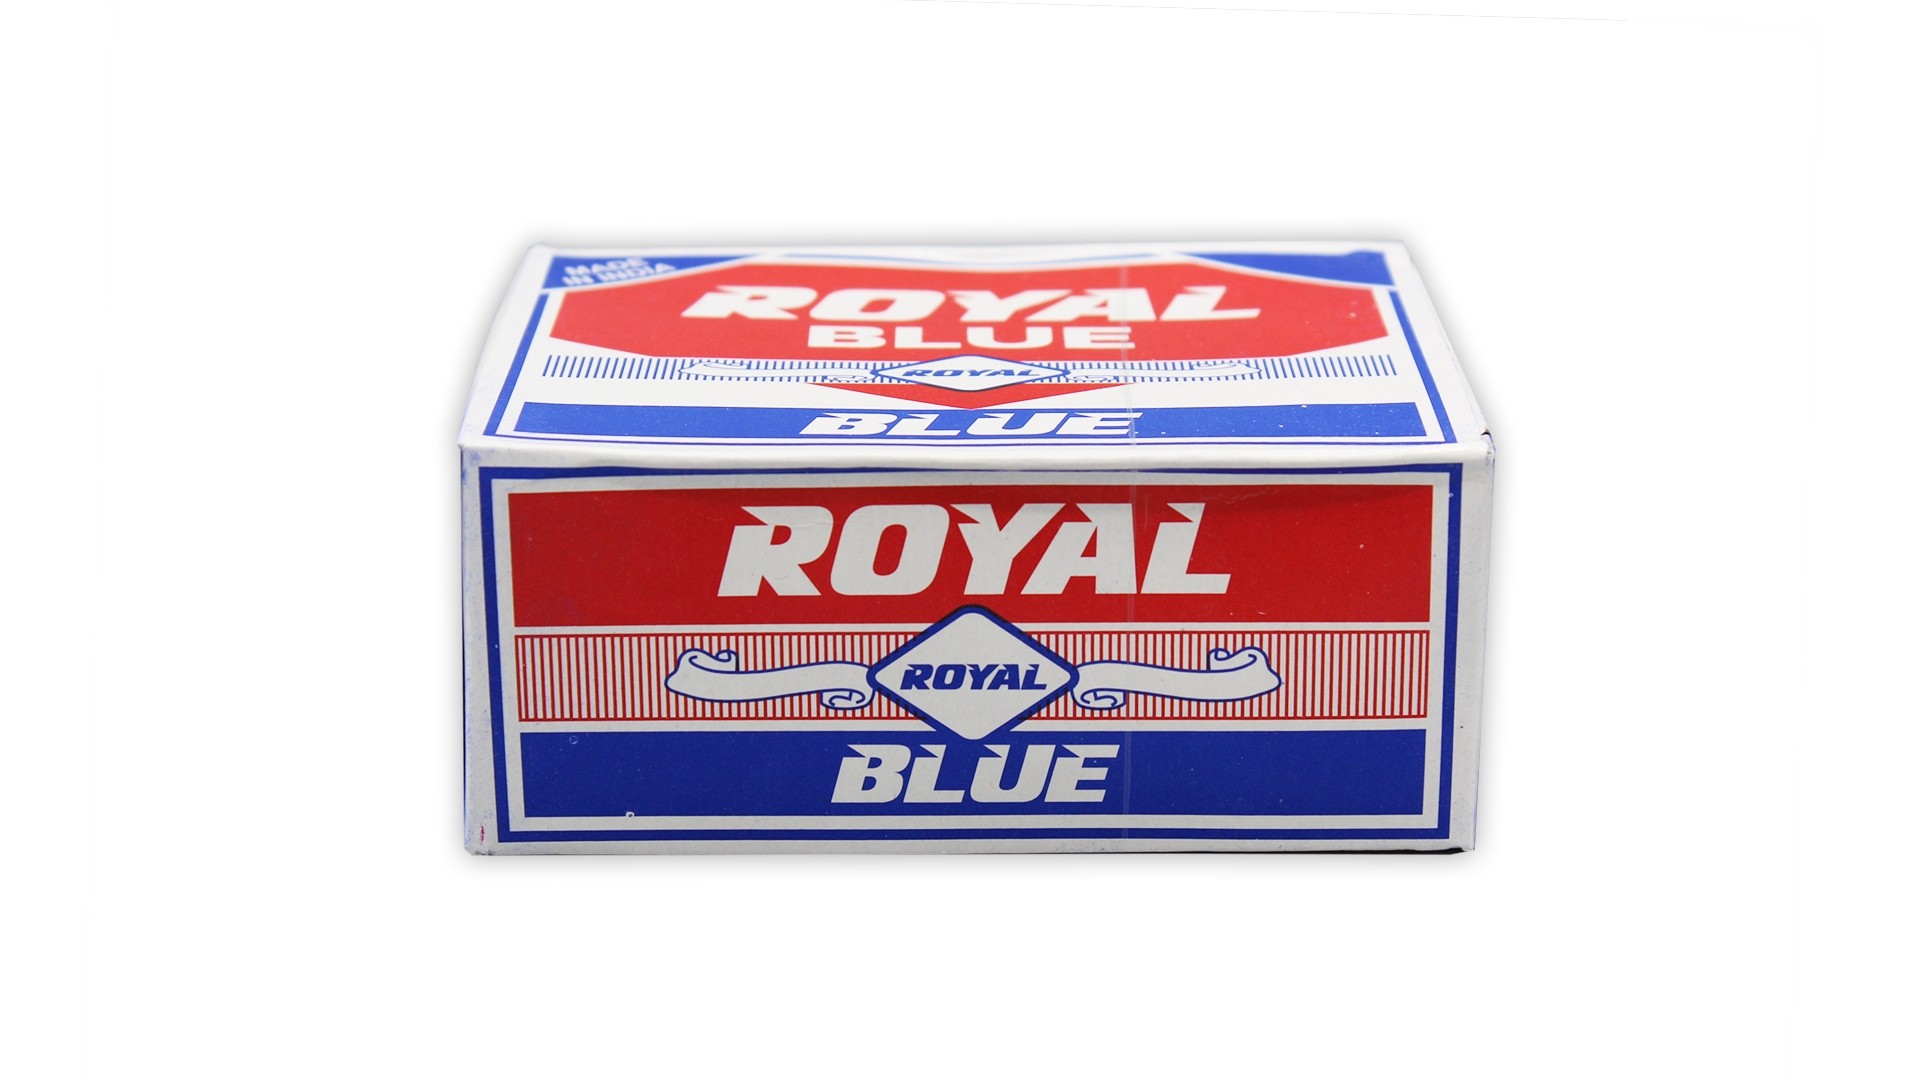 Royal Blue Verpackte Bl-cke (48 Pieces)